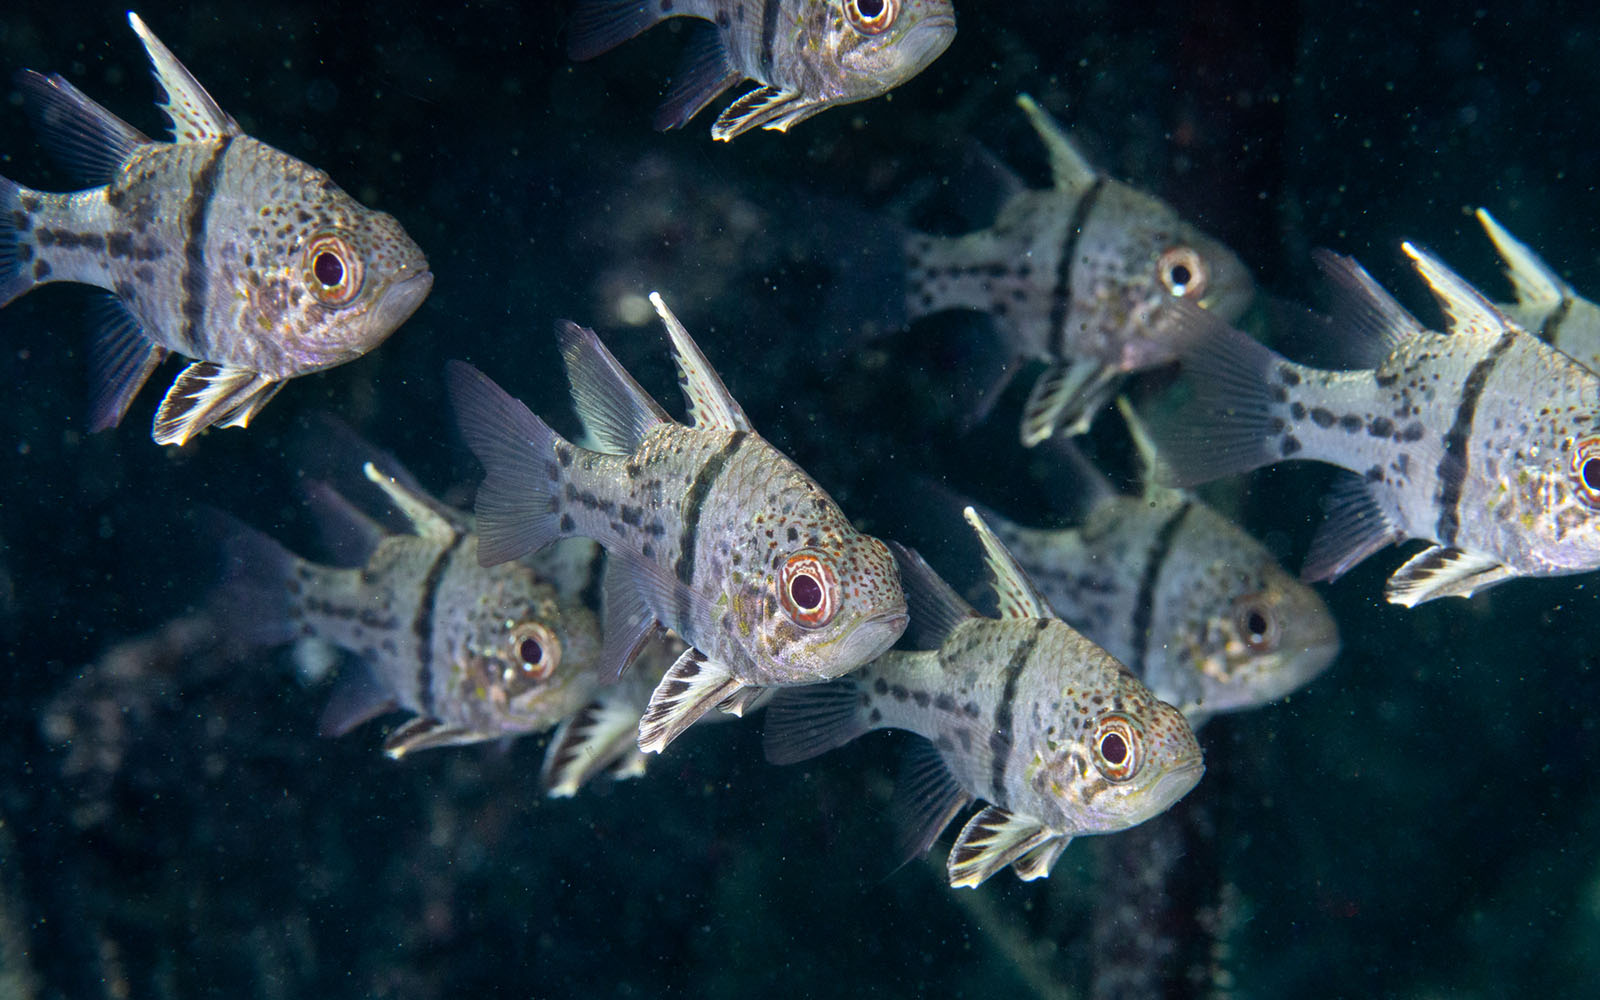 Orbicular cardinalfish photographed by Snorkel Vacations on a snorkeling trip to Raja Ampat on a